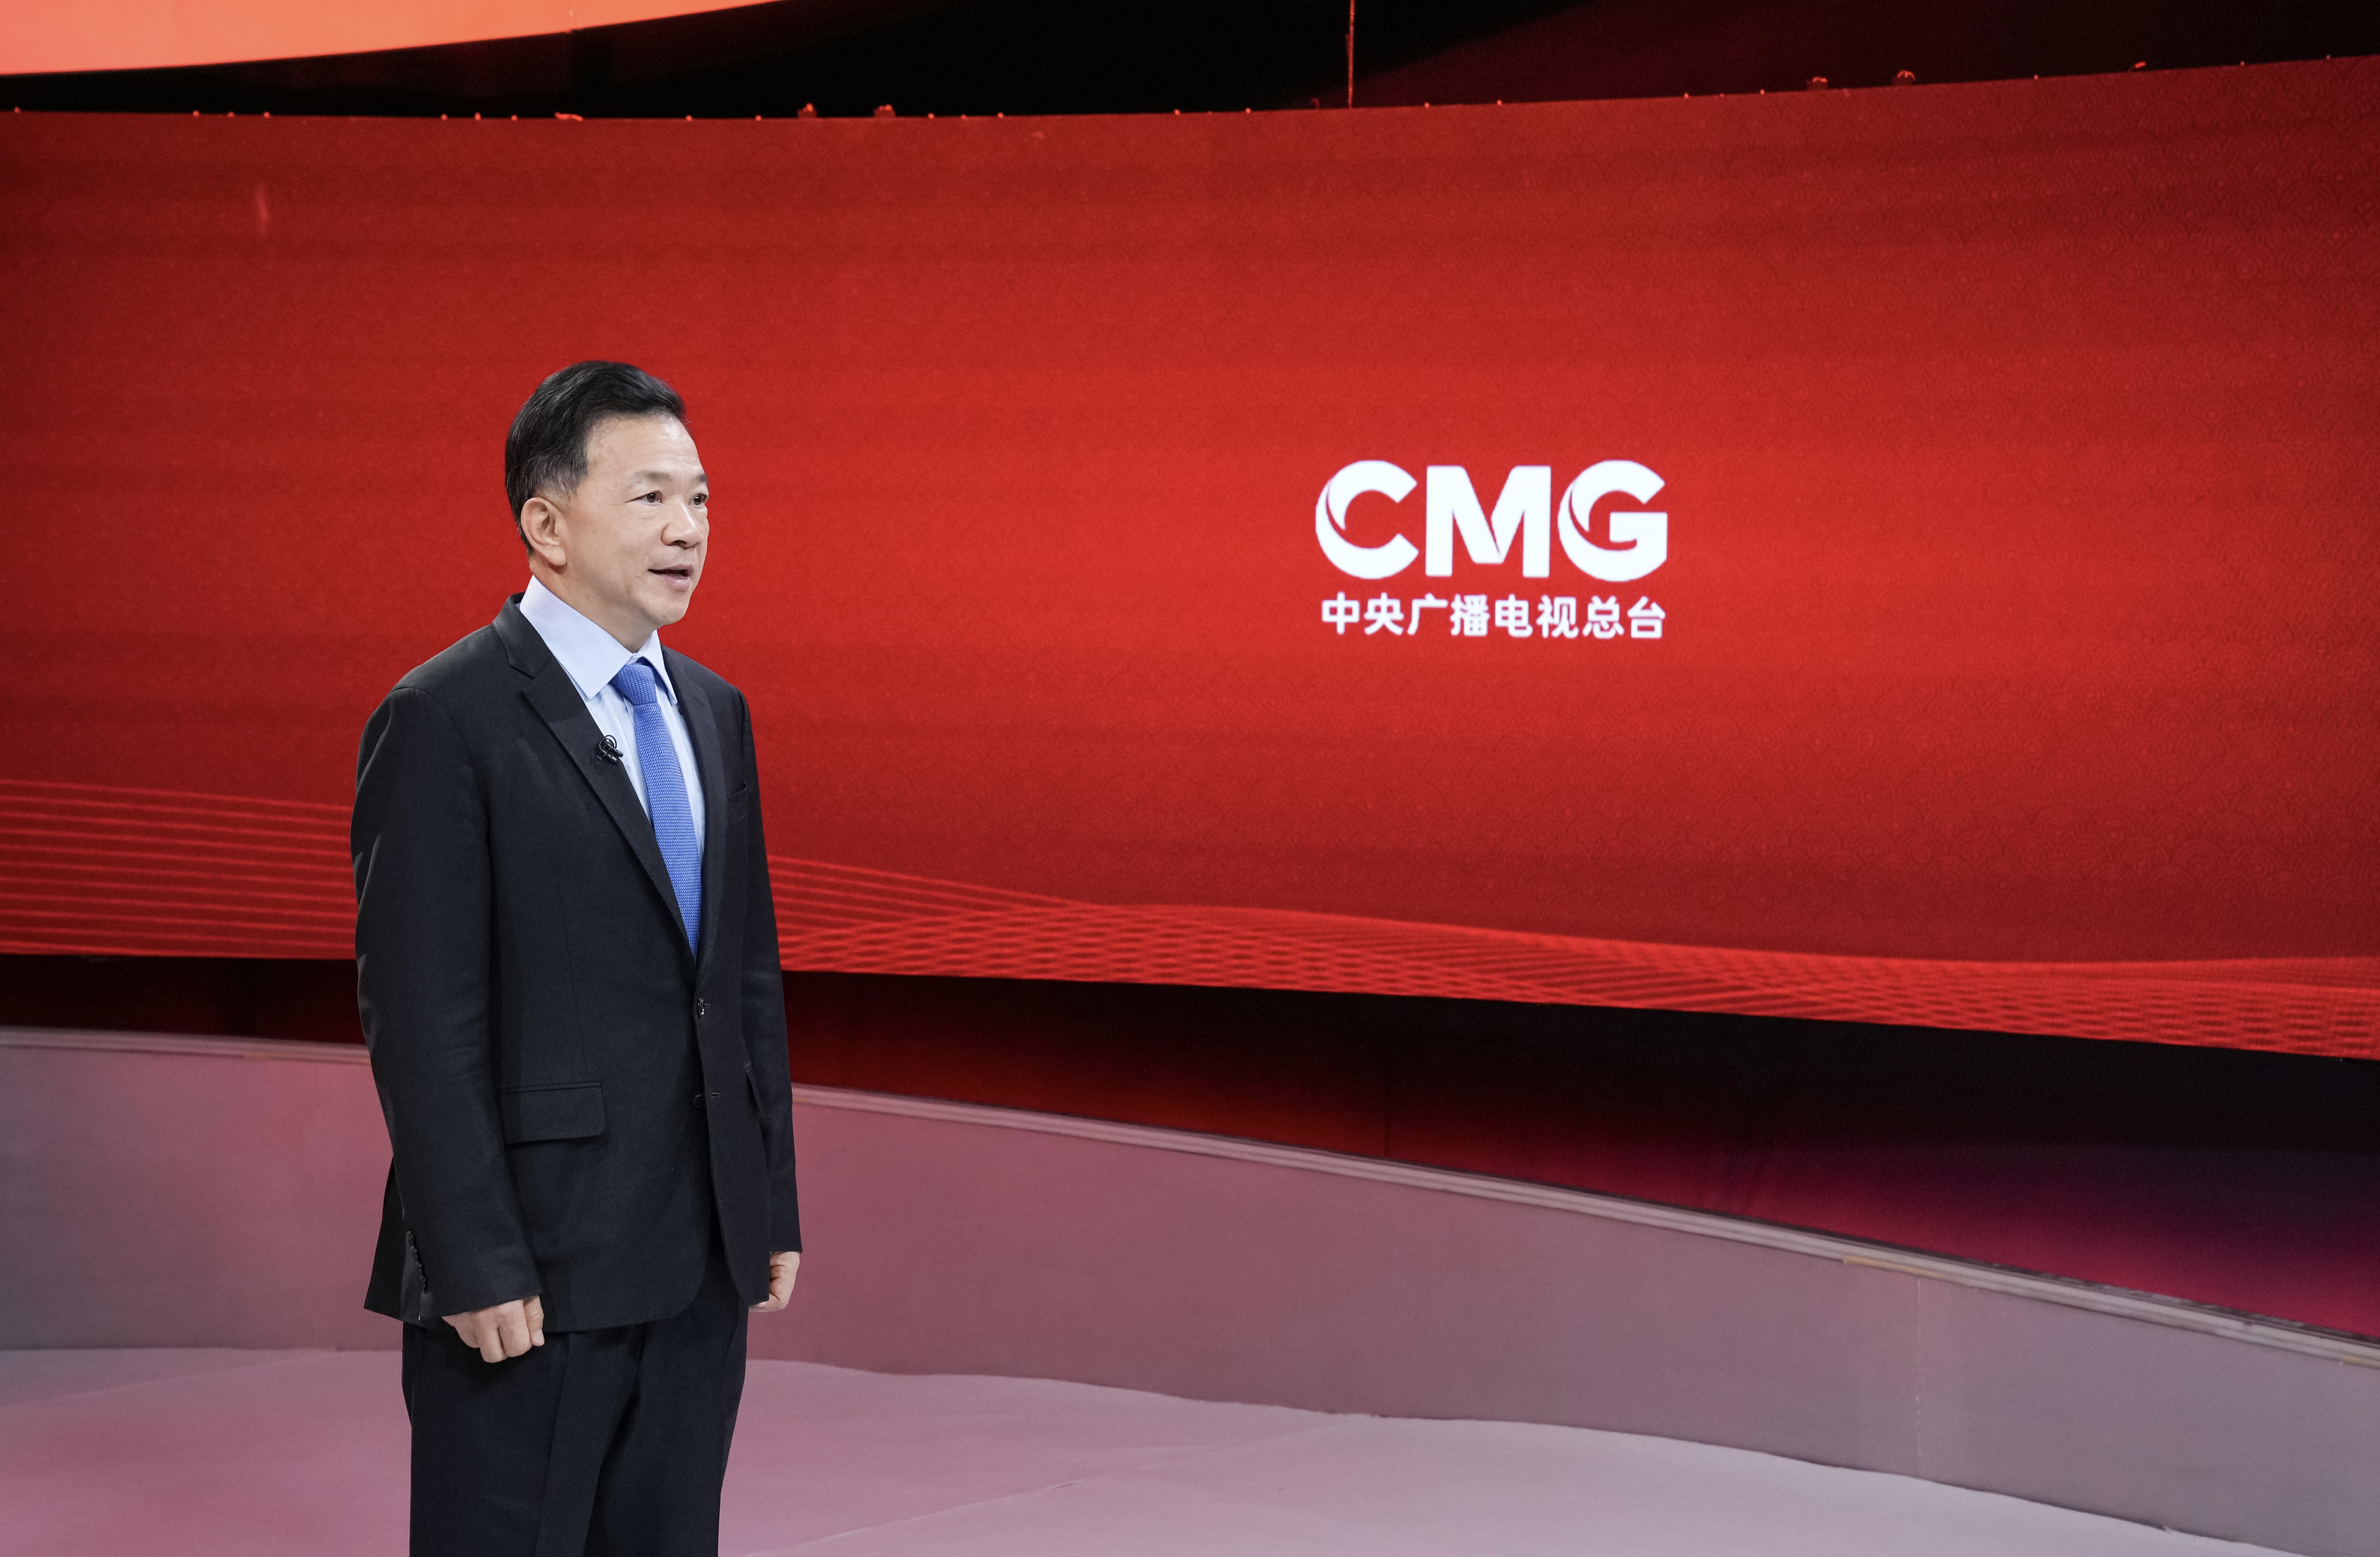 CMG president extends New Year greetings to global audiences